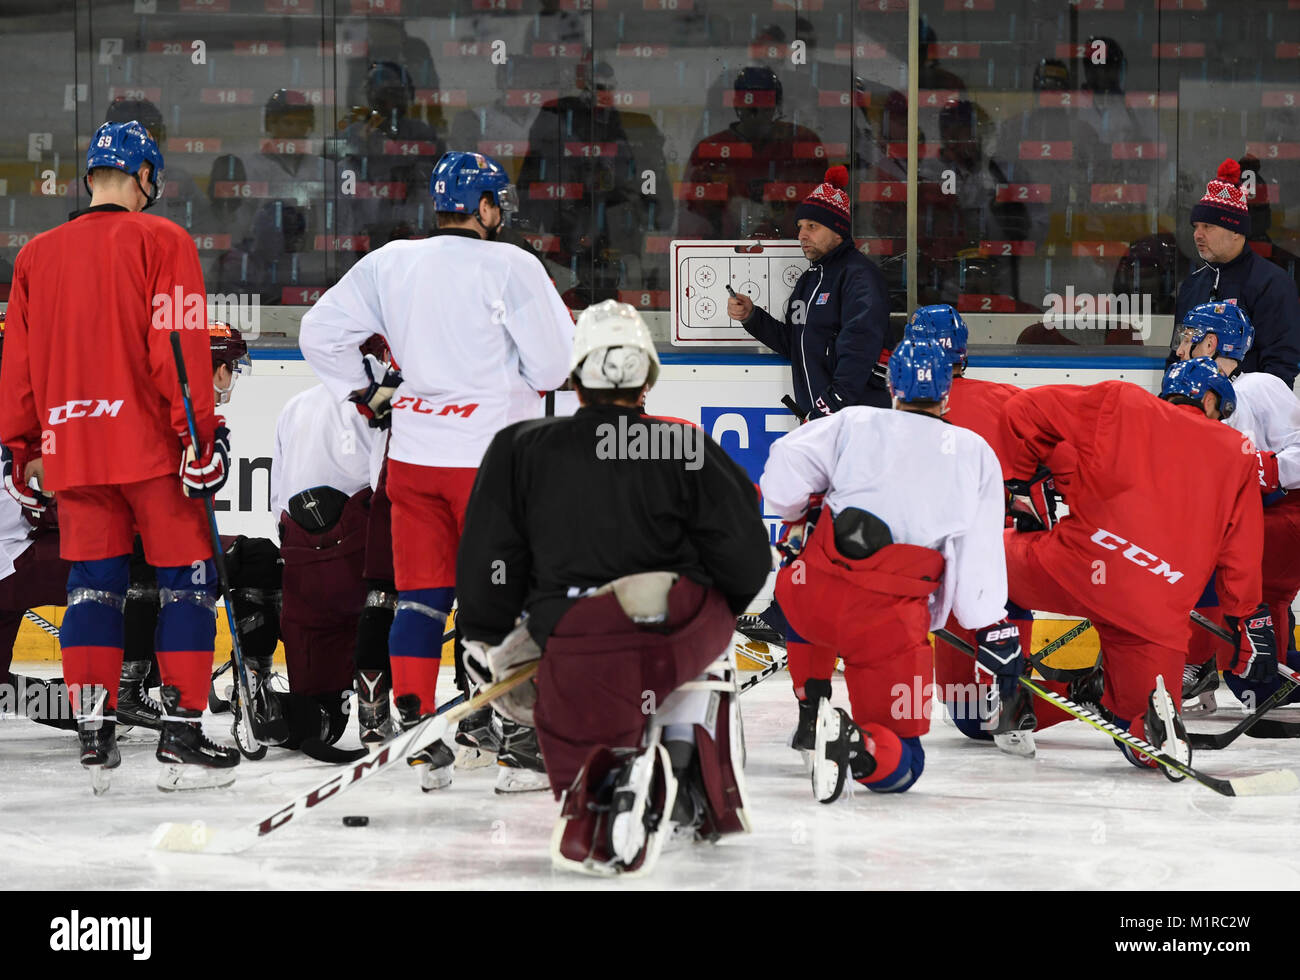 Prague, Czech Republic. 01st Feb, 2018. L-R (in the background) Josef Jandac and Jiri Kalous, coaches of the Czech ice hockey national team, lead a training session in Prague, Czech Republic, on Thursday, February 1, 2018, prior to the 2018 Winter Olympics in Pyeongchang, South Korea. Credit: Michal Krumphanzl/CTK Photo/Alamy Live News Stock Photo